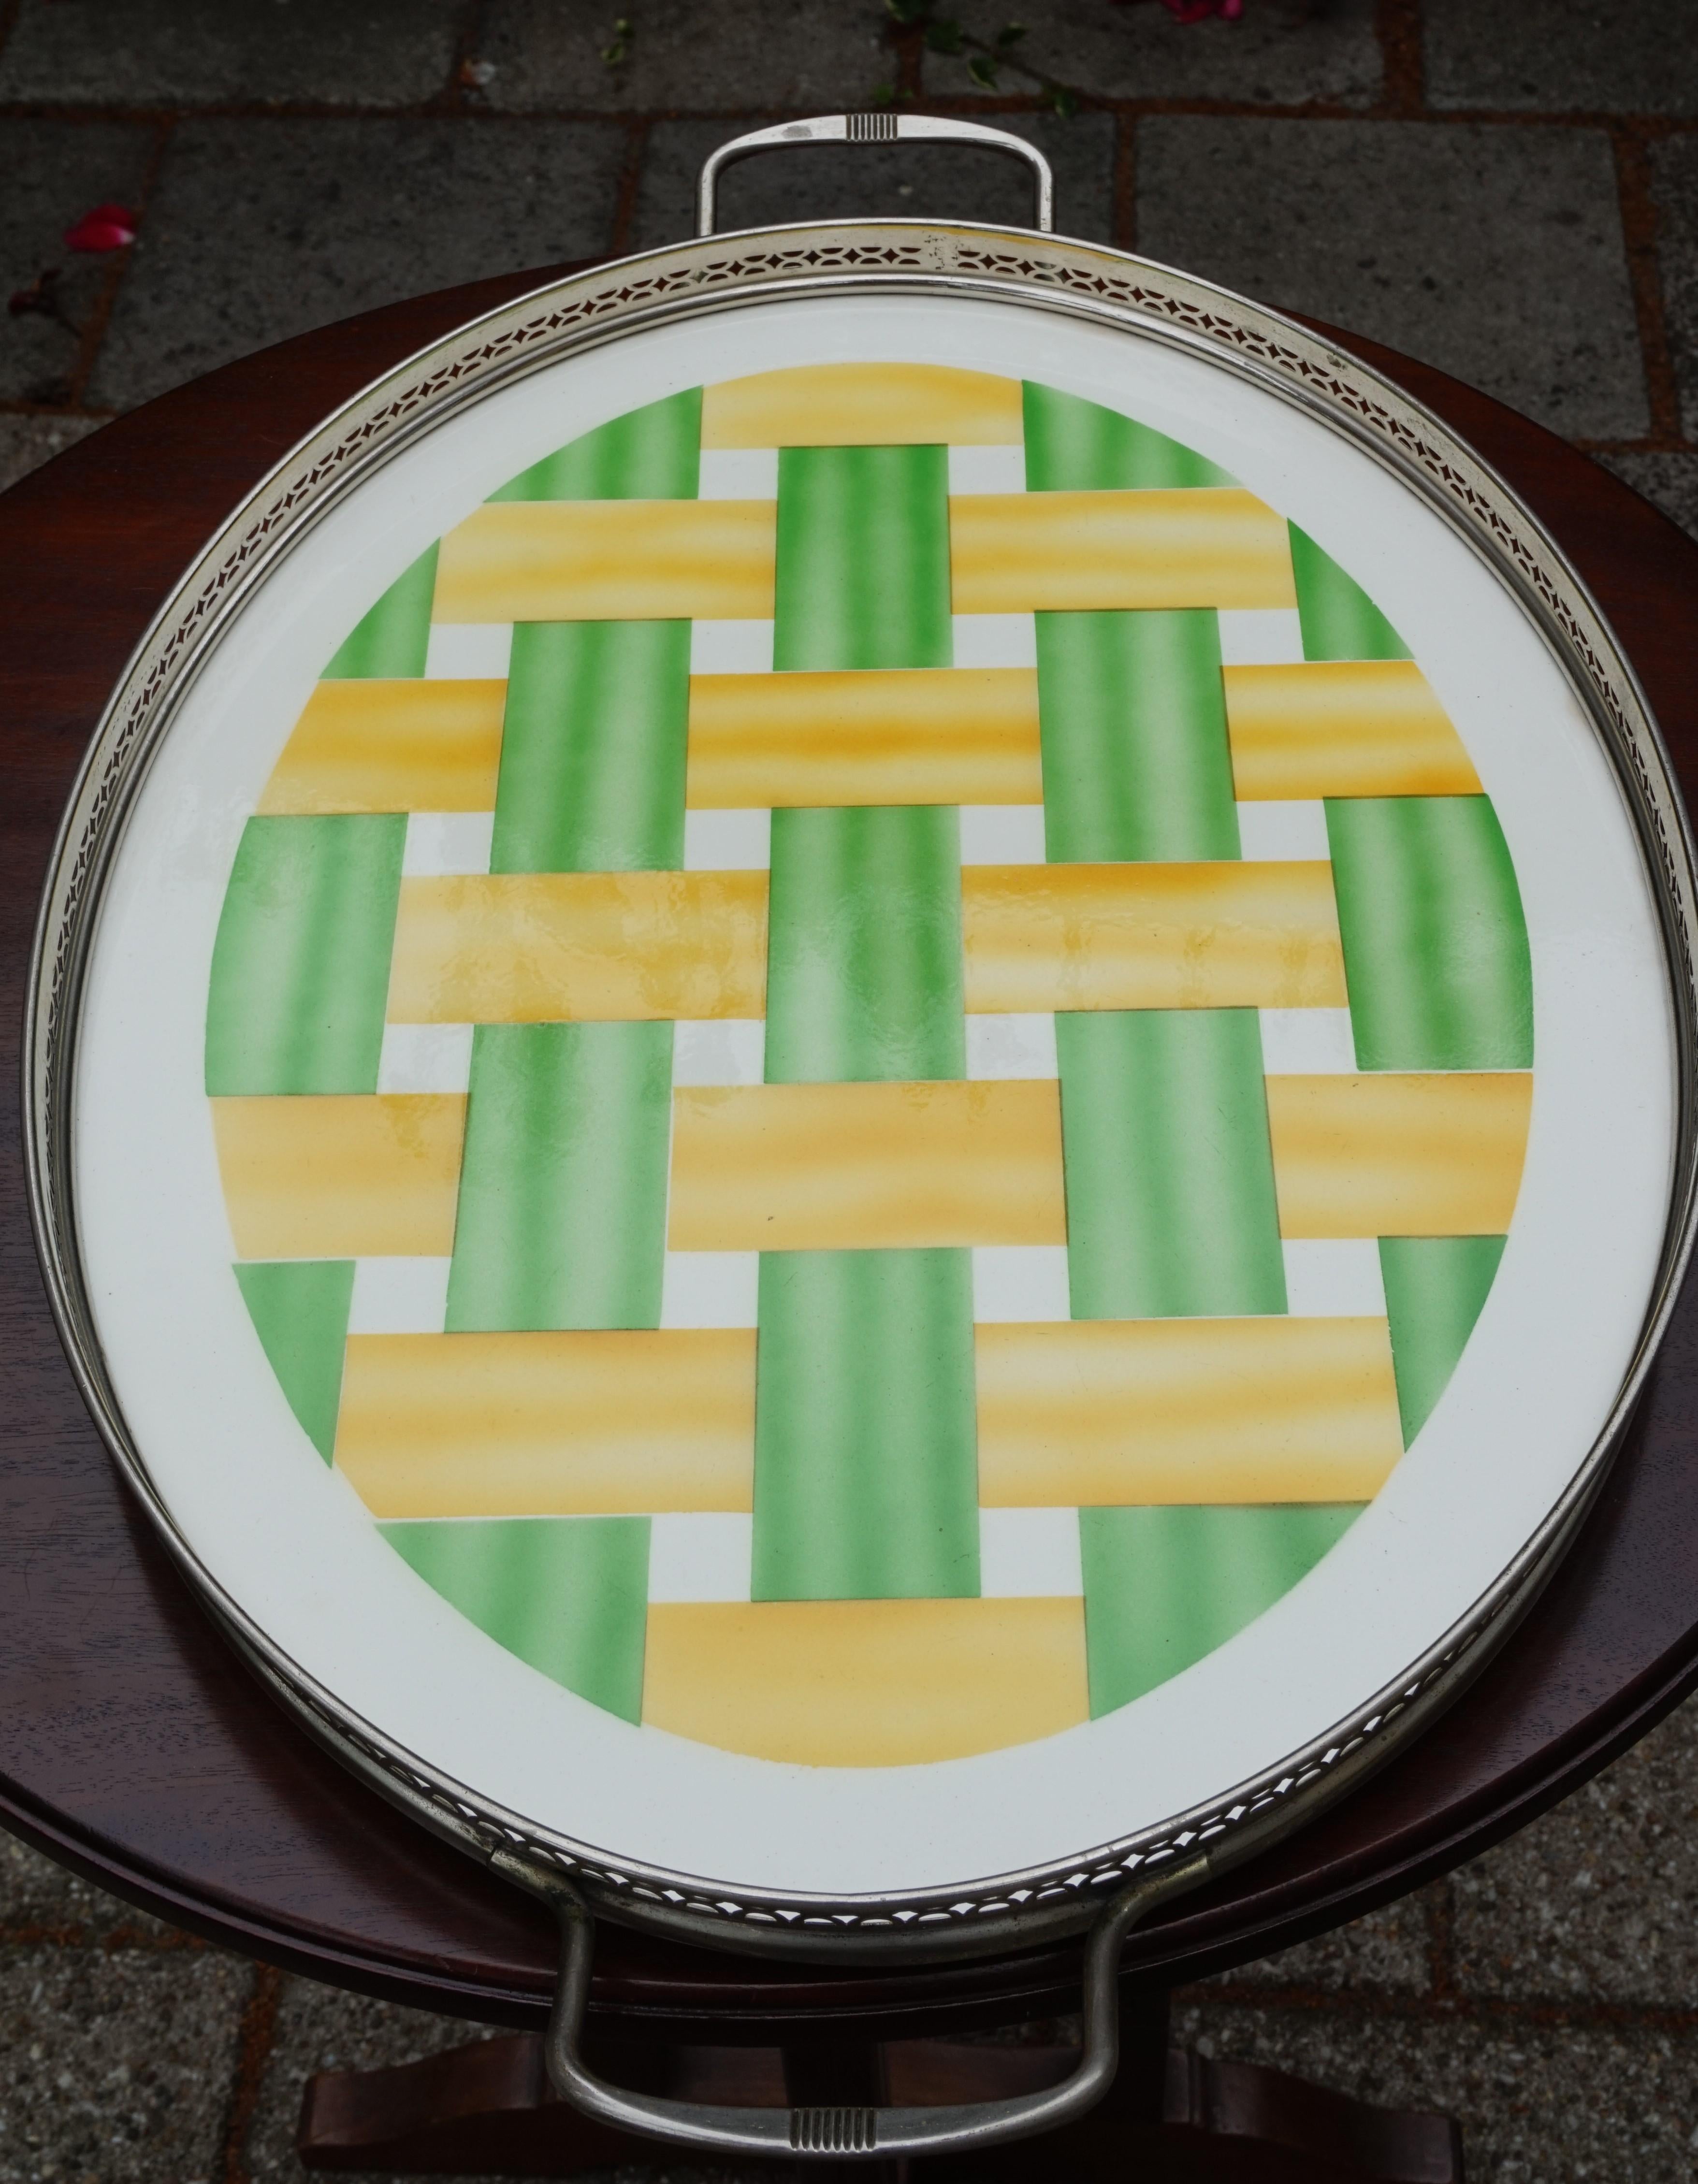 Large, Oval Art Deco Porcelain Tile Serving Tray, Woven Yellow and Green Pattern For Sale 6